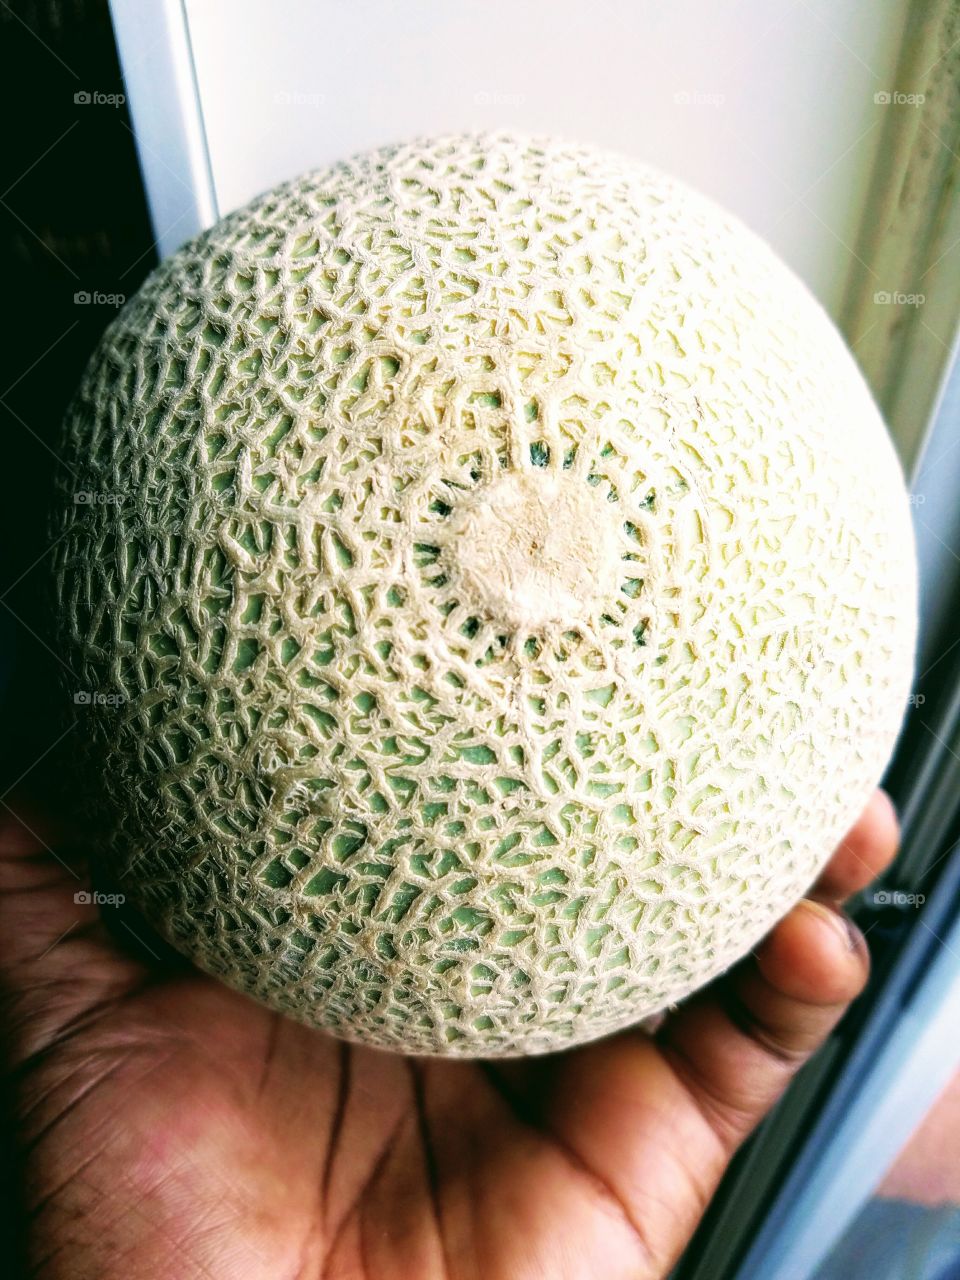 Cantaloupe in hand